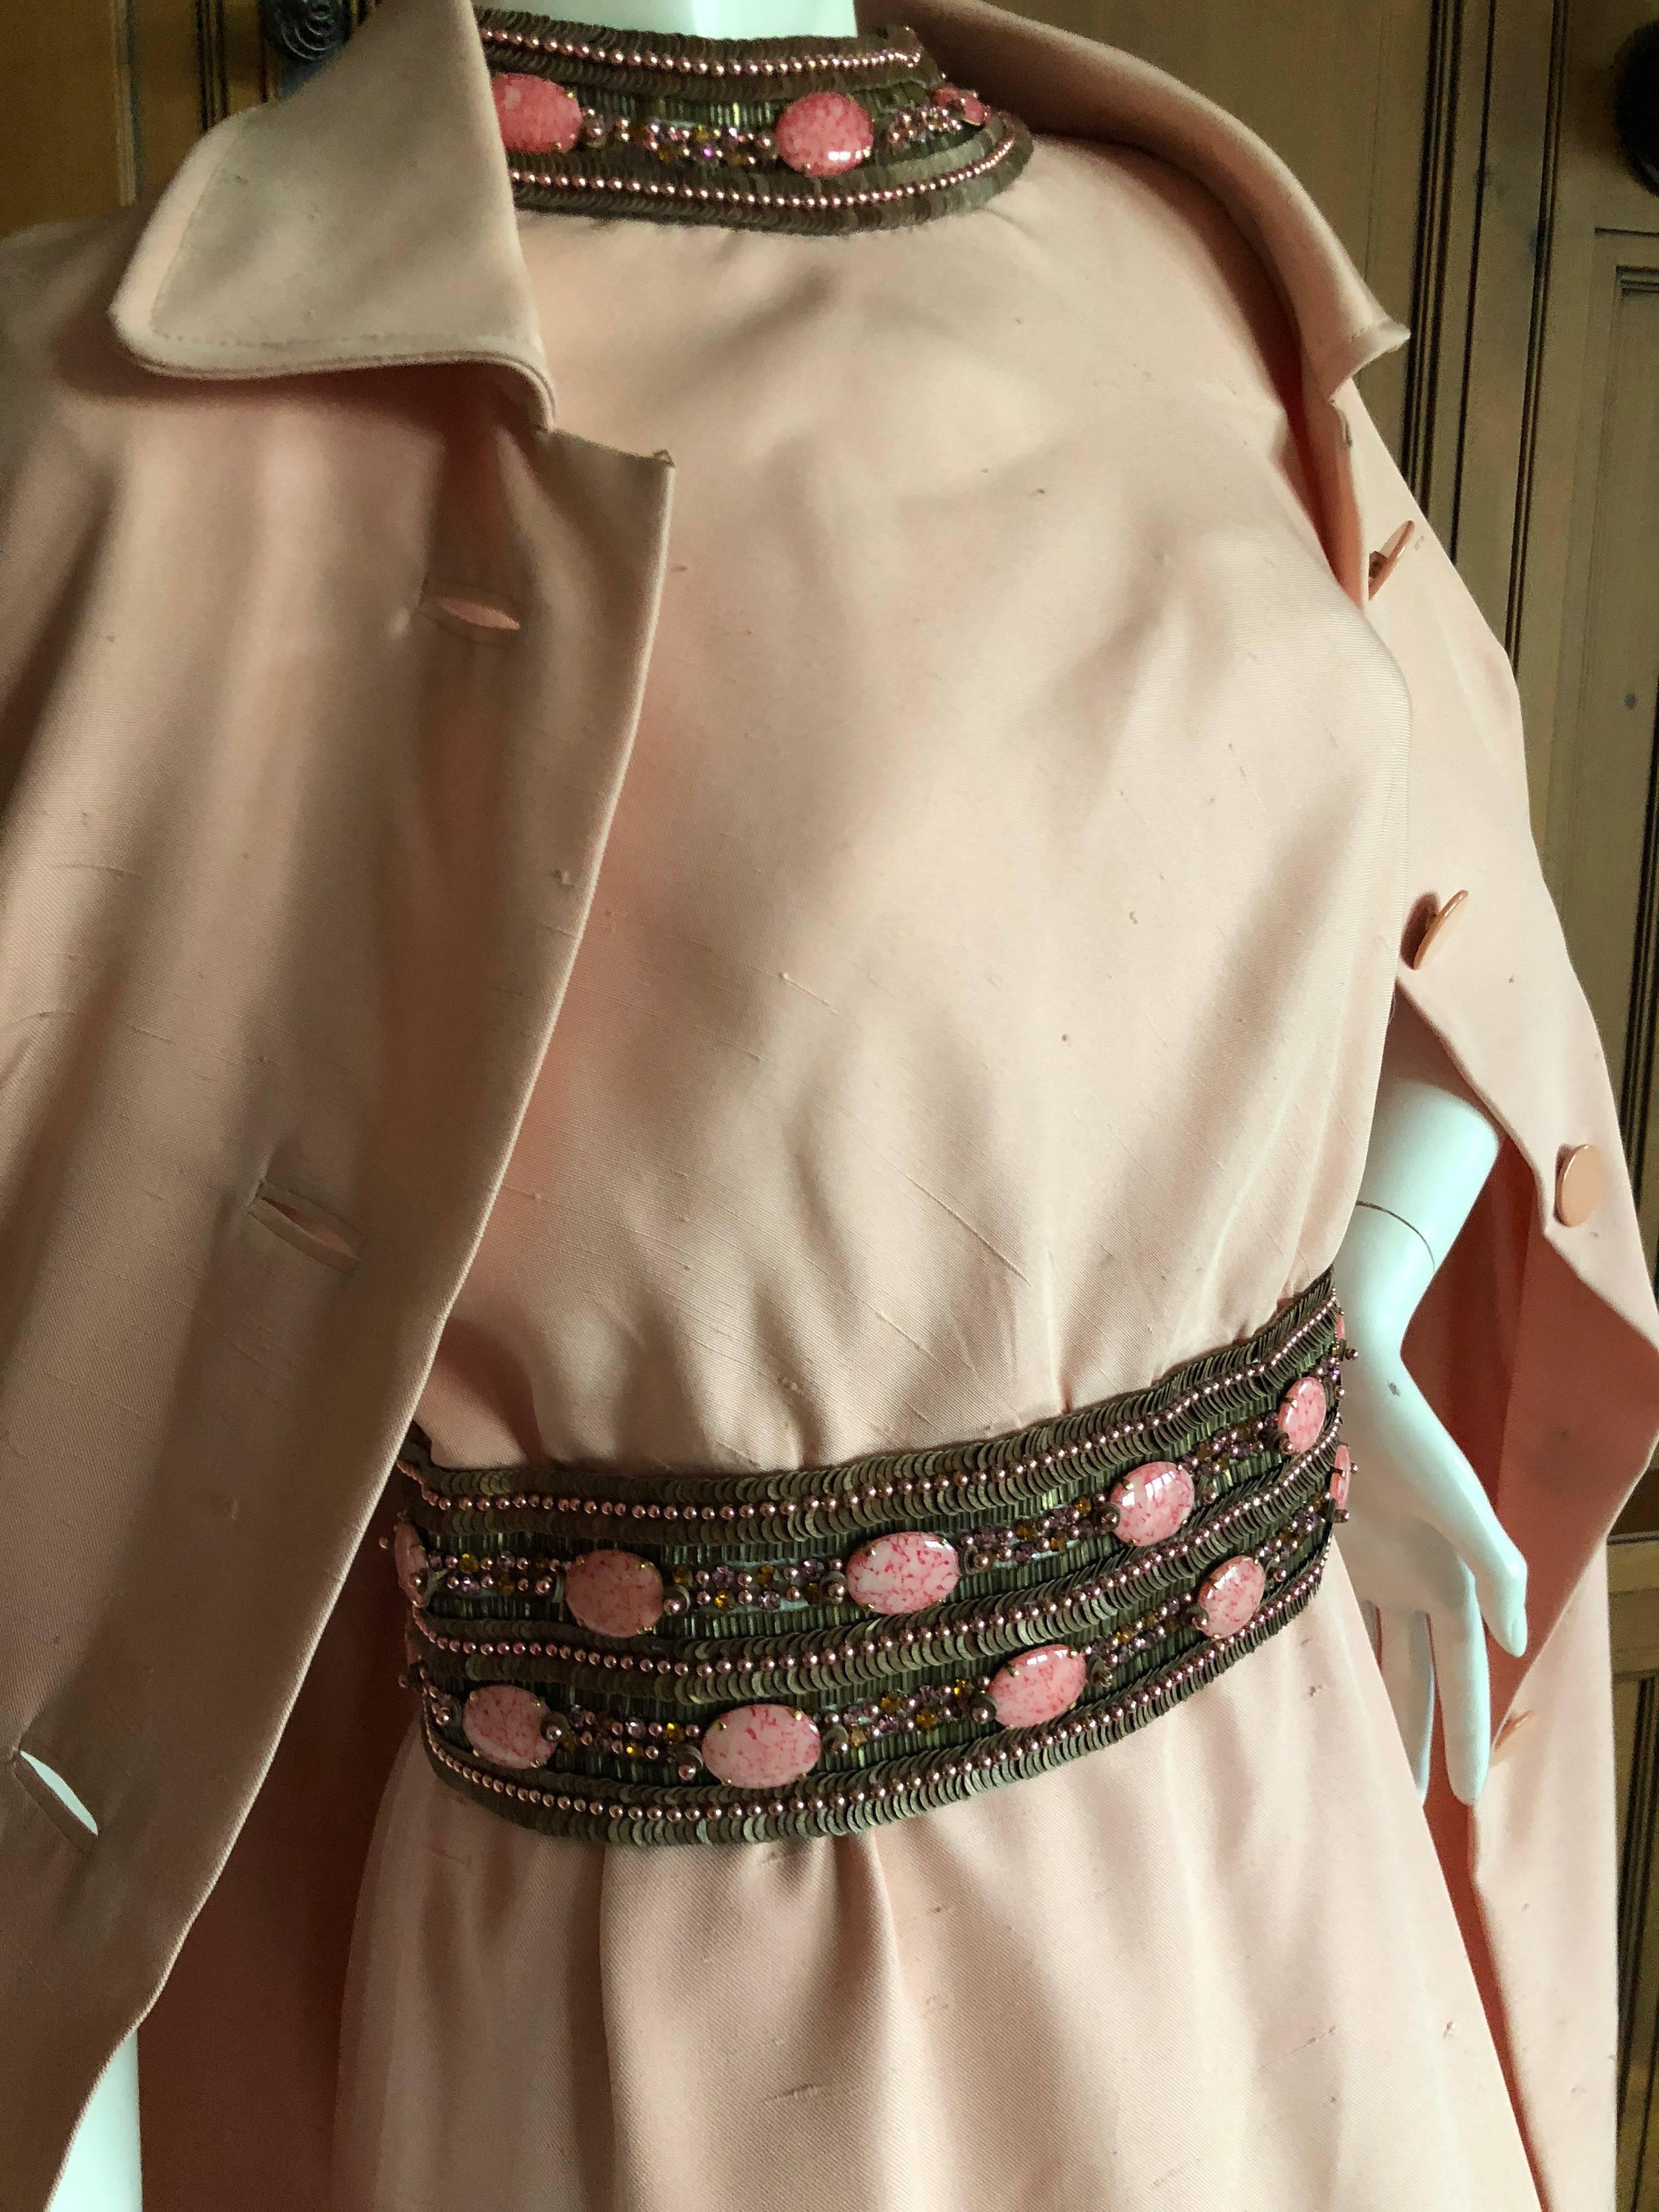 Pierre Balmain Numbered Haute Couture 1962 Evening Dress & Coat .
Both coat and dress feature numbered Haute Couture lables.
Featuring a sleeveless sheath dress with bead and cabachon embellished collar and belt, and matching coat.
The dress has a